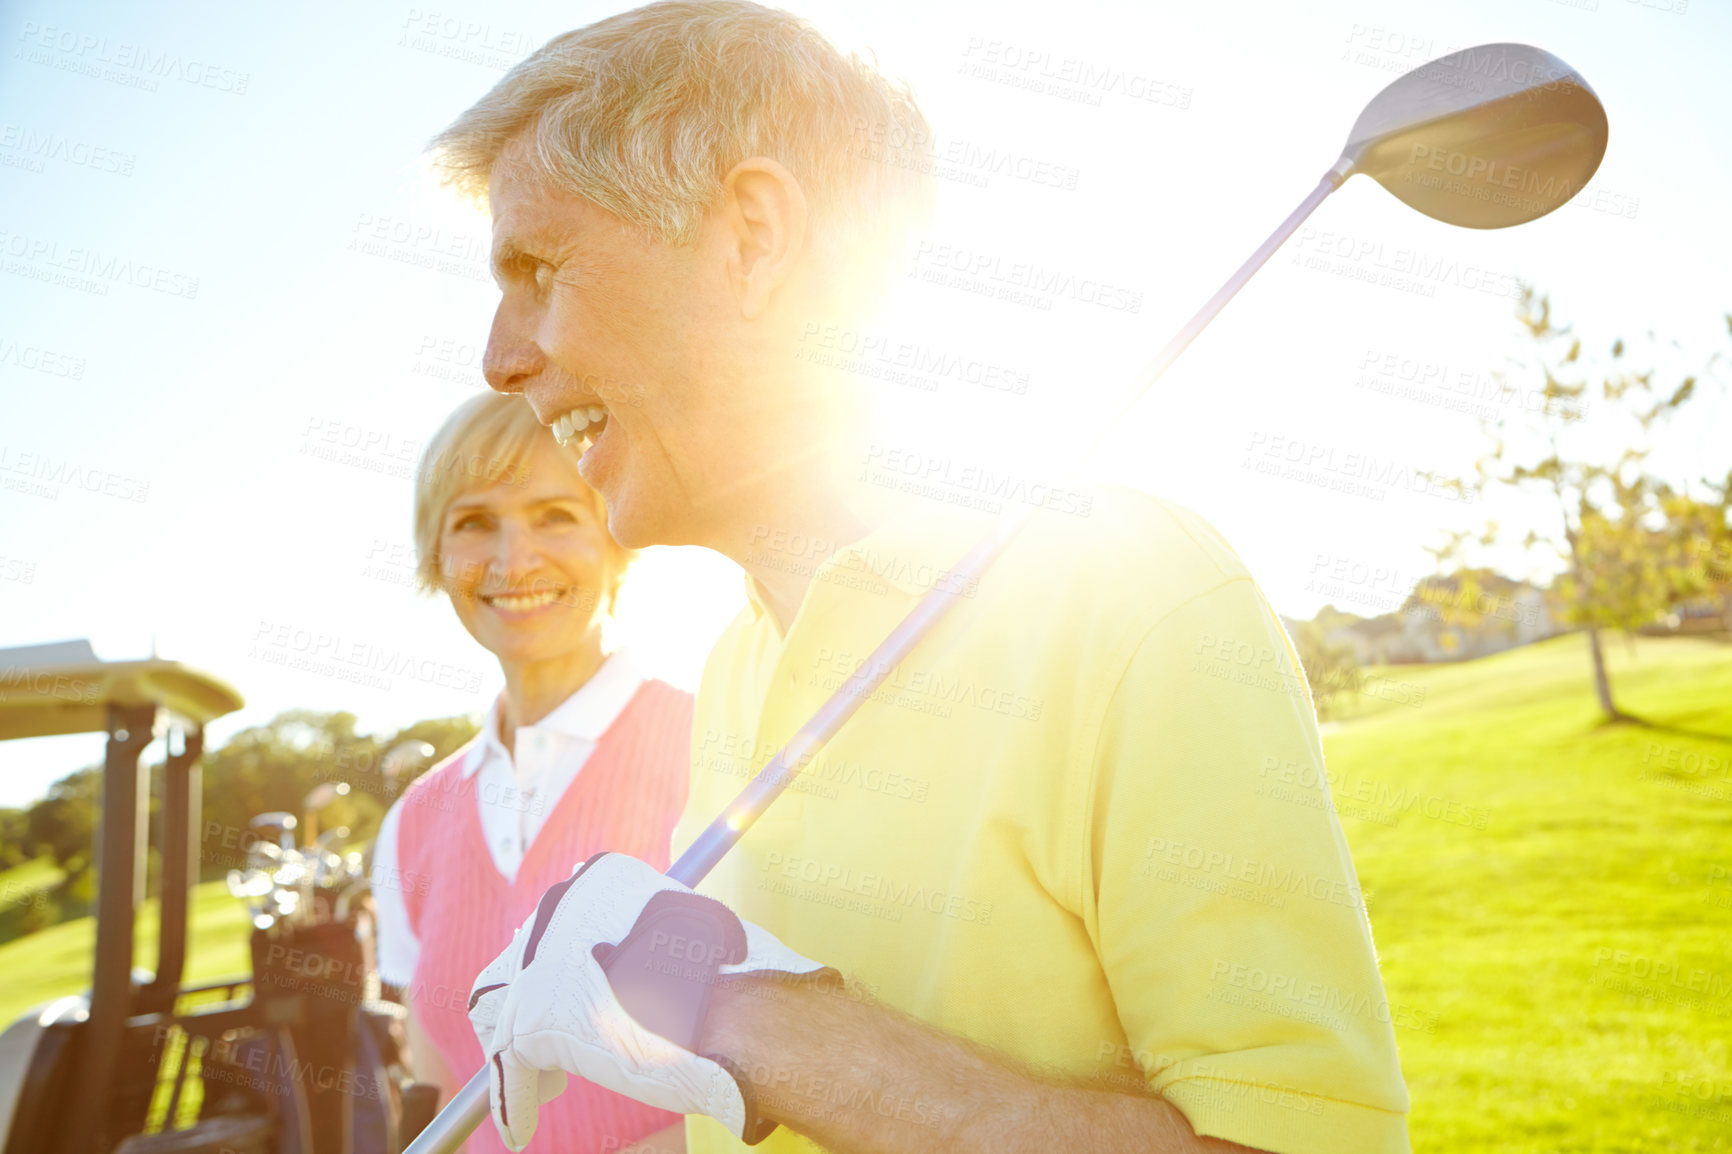 Buy stock photo Attractive elderly couple with their golf clubs over their shoulders